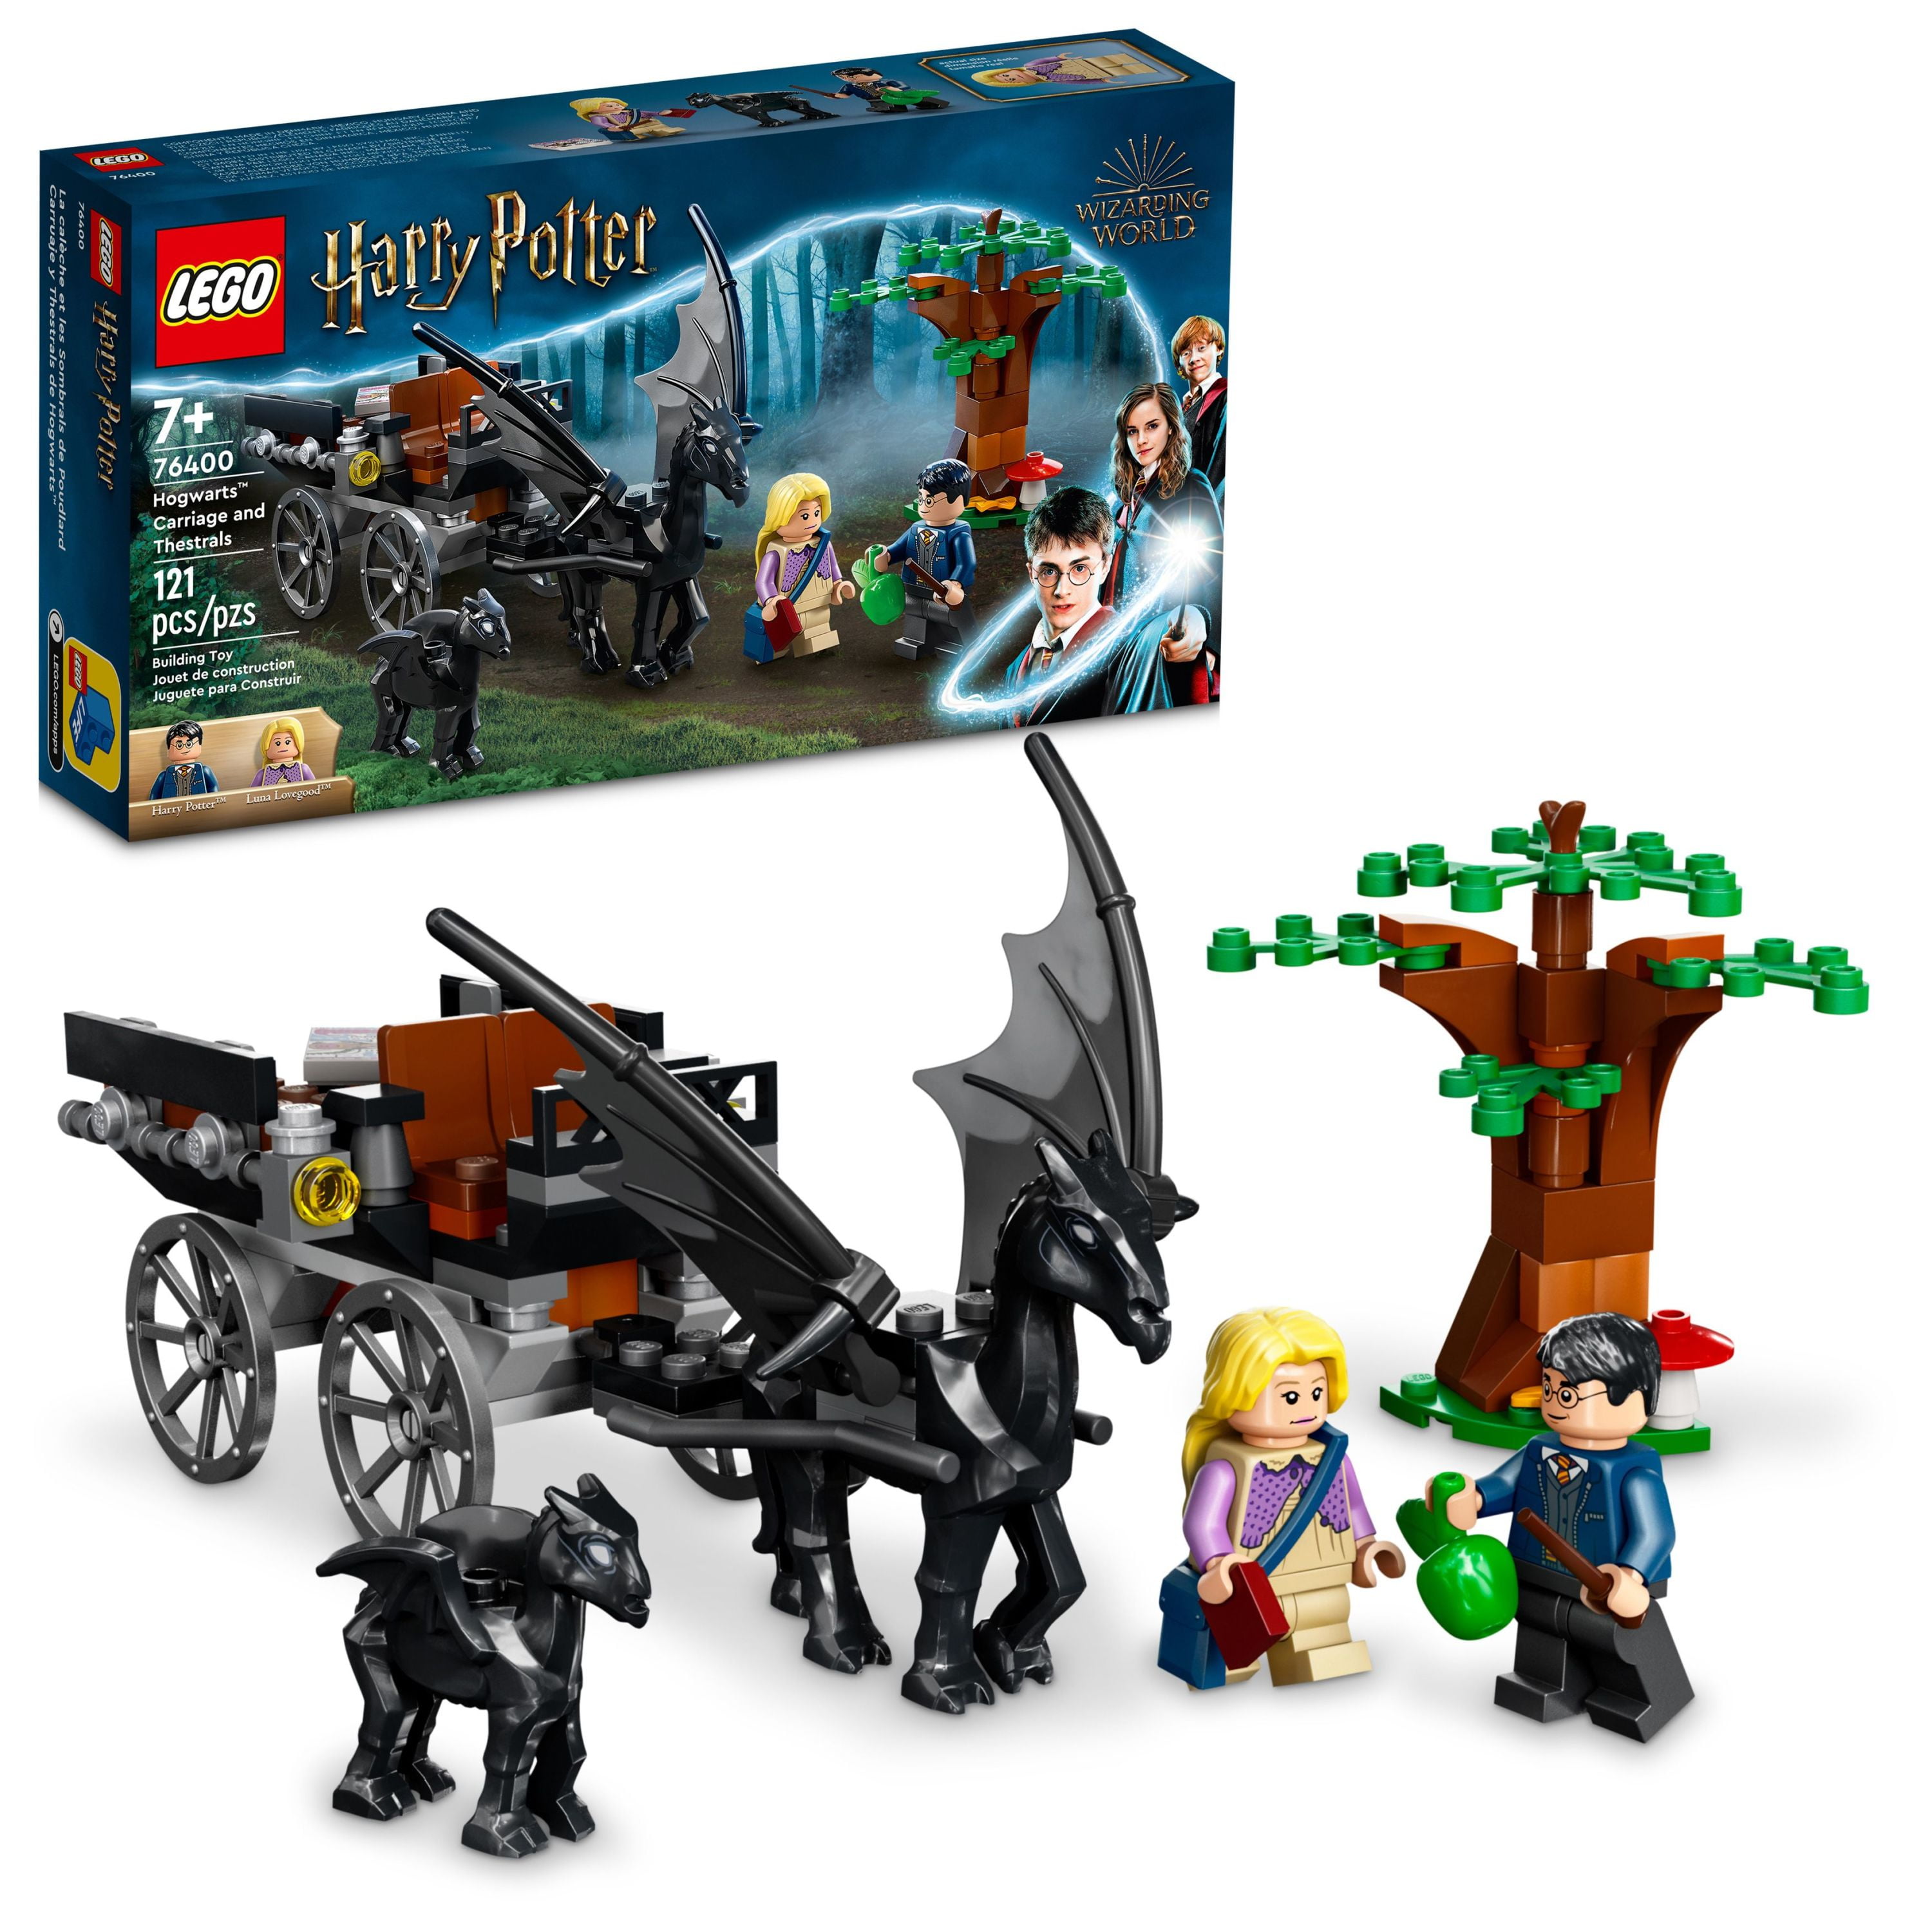 LEGO Harry Potter Hogwarts Carriage & Thestrals Set 76400, Building Toy for Kids 7 Plus Years Old with 2 Winged Horse Figures and Luna Lovegood Minifigure